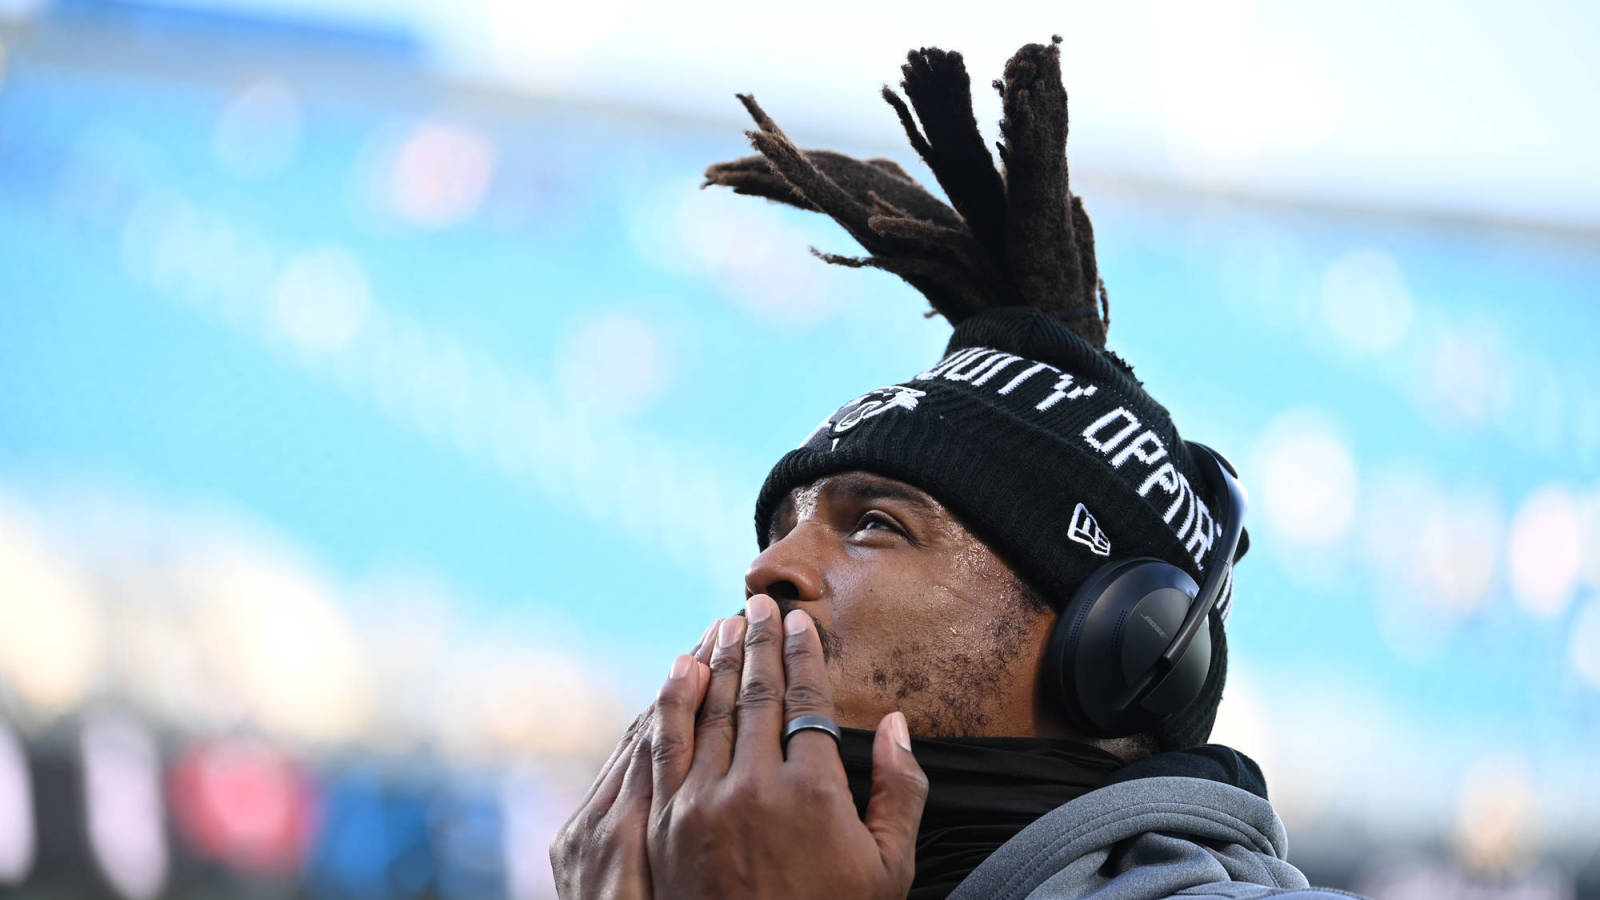 Have Cam Newton, Panthers reached the end of the road?